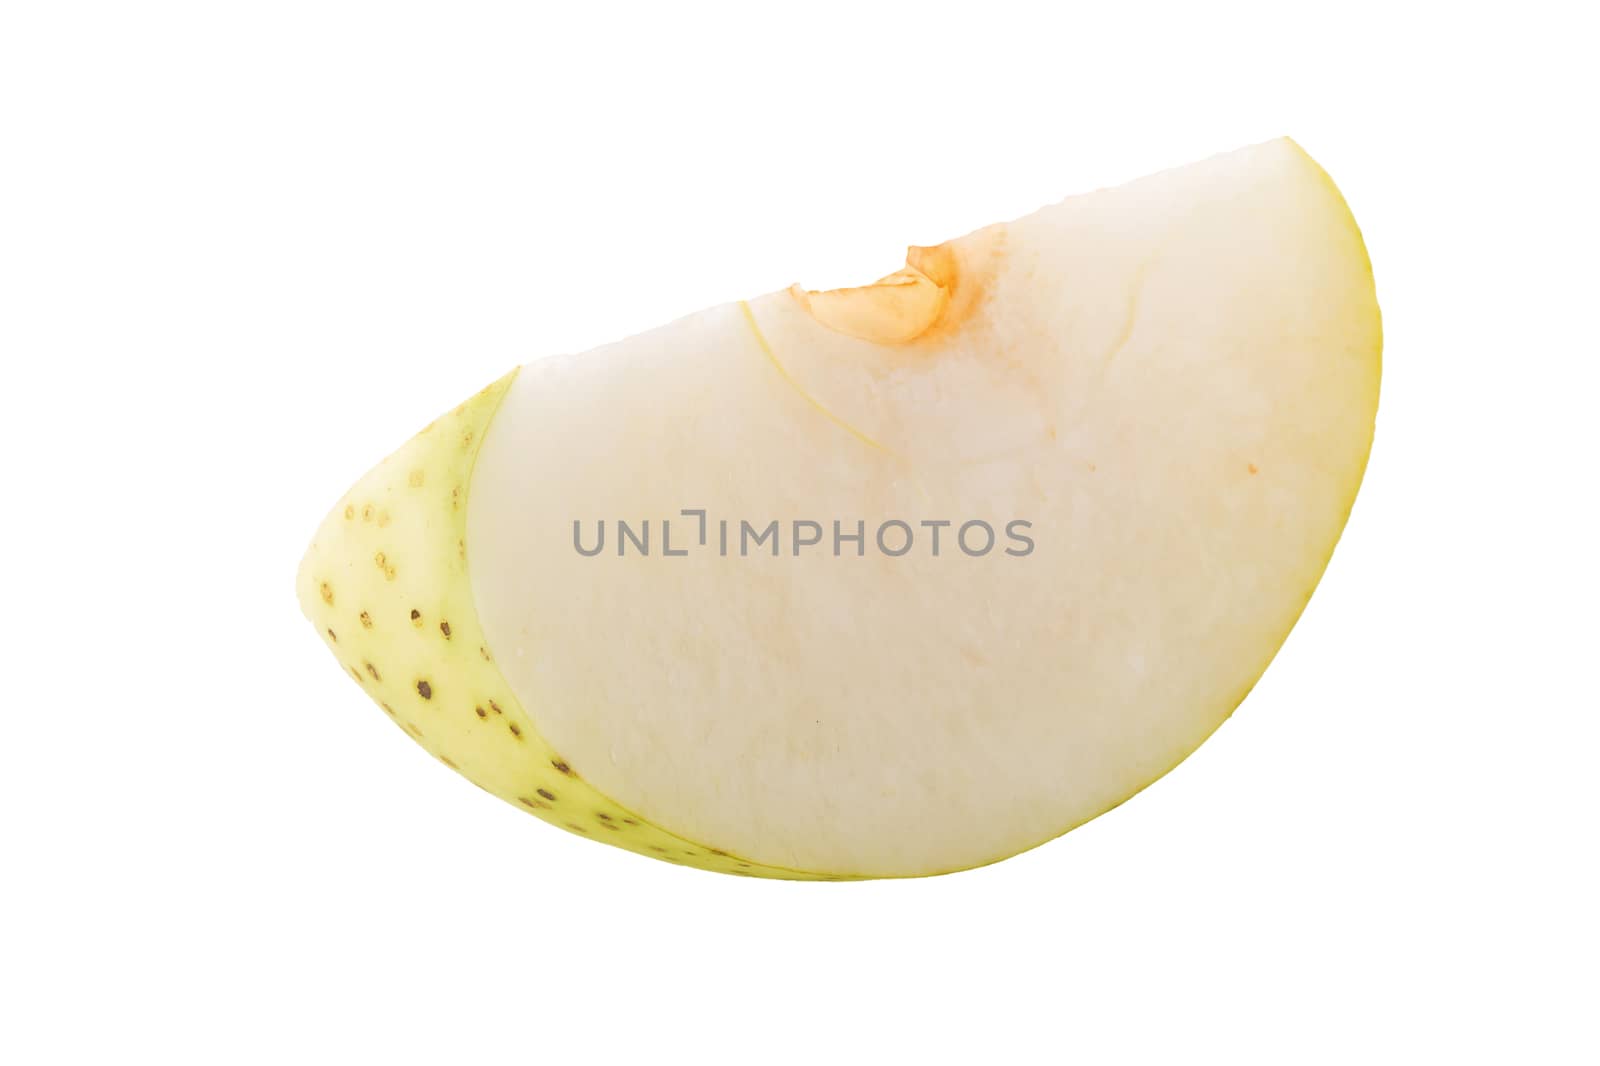 Chinese pear and Sliced isolated on a whate background by kaiskynet